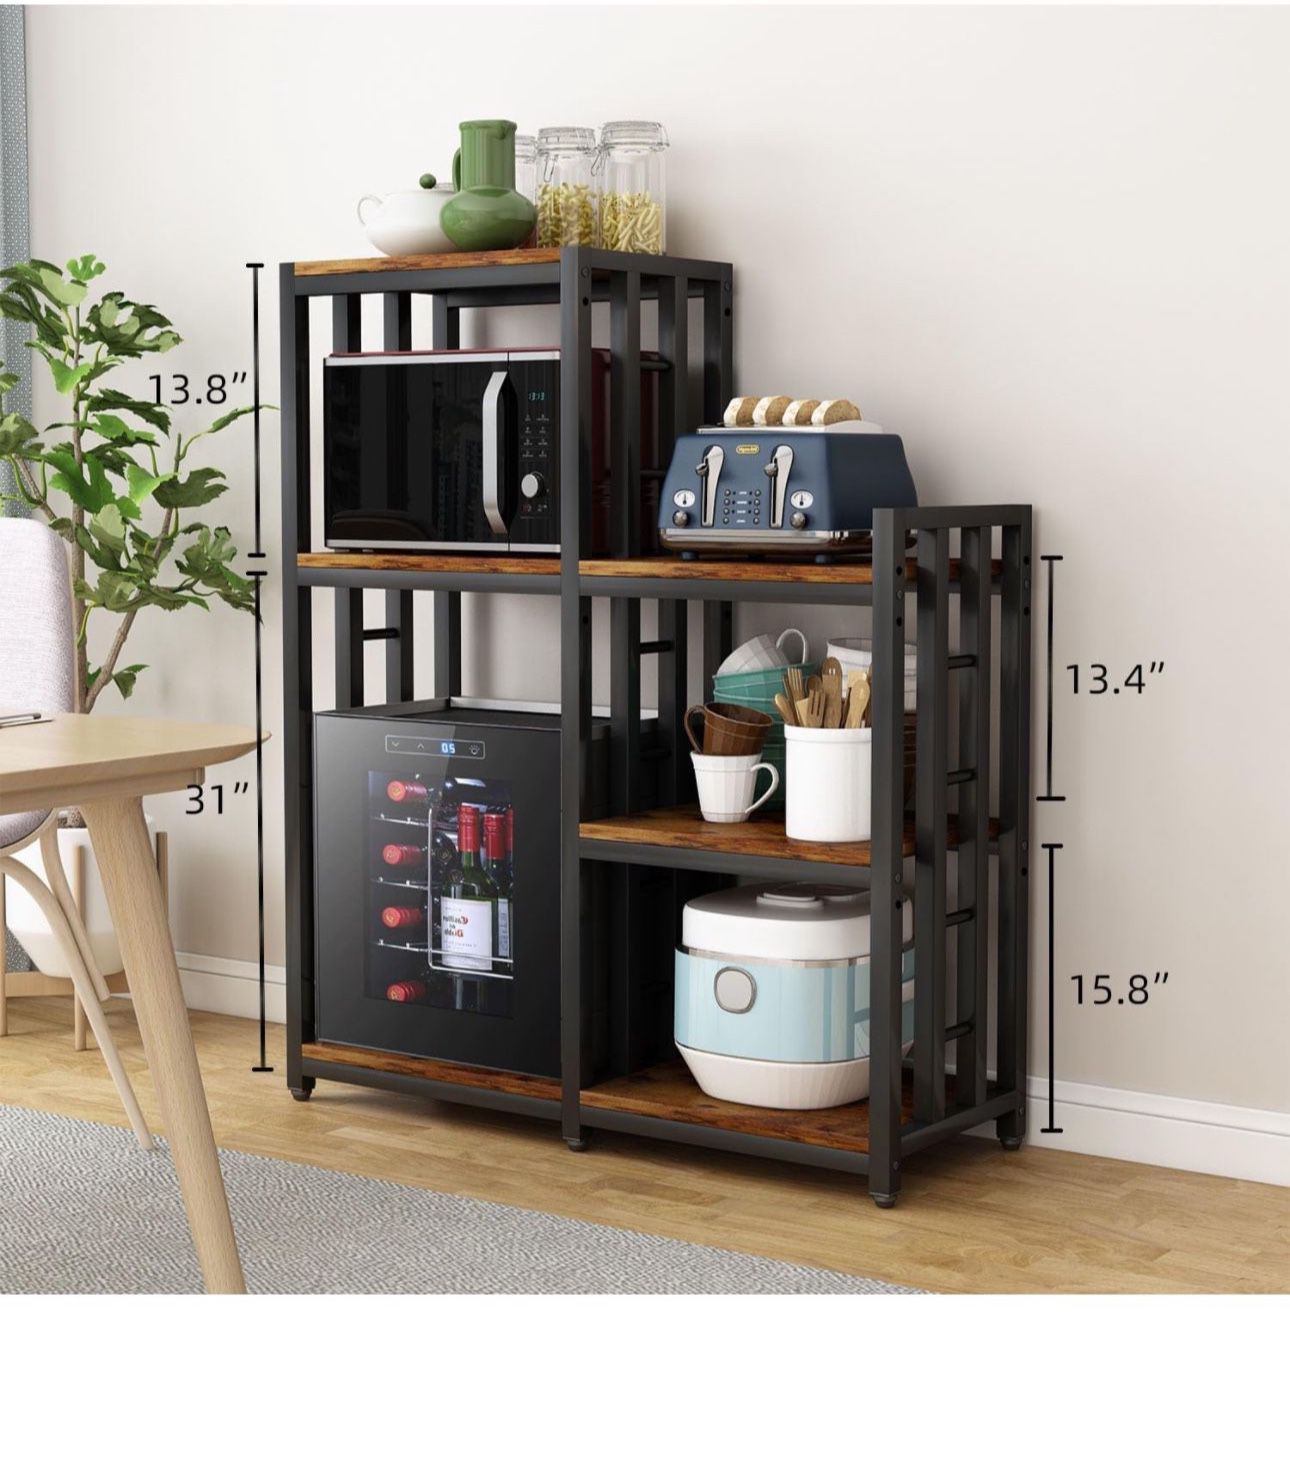 BRIGHTSHOW Kitchen Storage Shelf Bakers Rack, 6-Tier Coffee Bar Table, Kitchen Microwave & Mini Fridge Stand Shelves for Spices, Pots and Pans